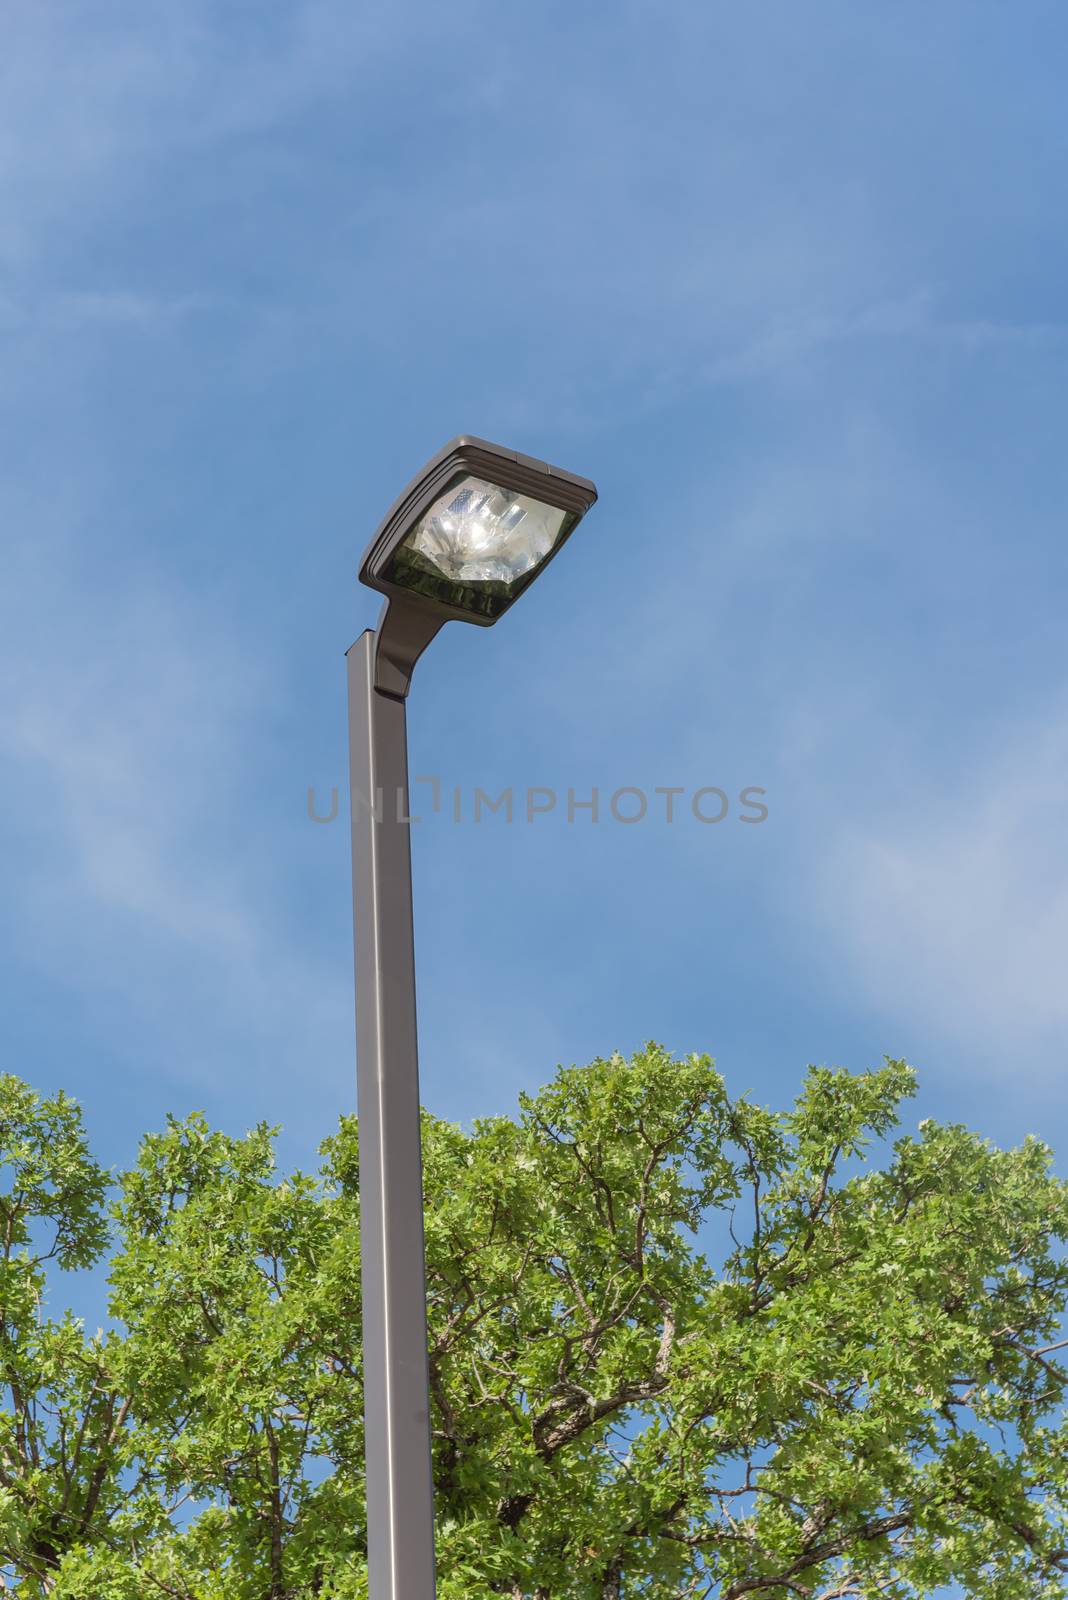 Street lamppost with bright lighting at daytime for wasting electricity concept by trongnguyen